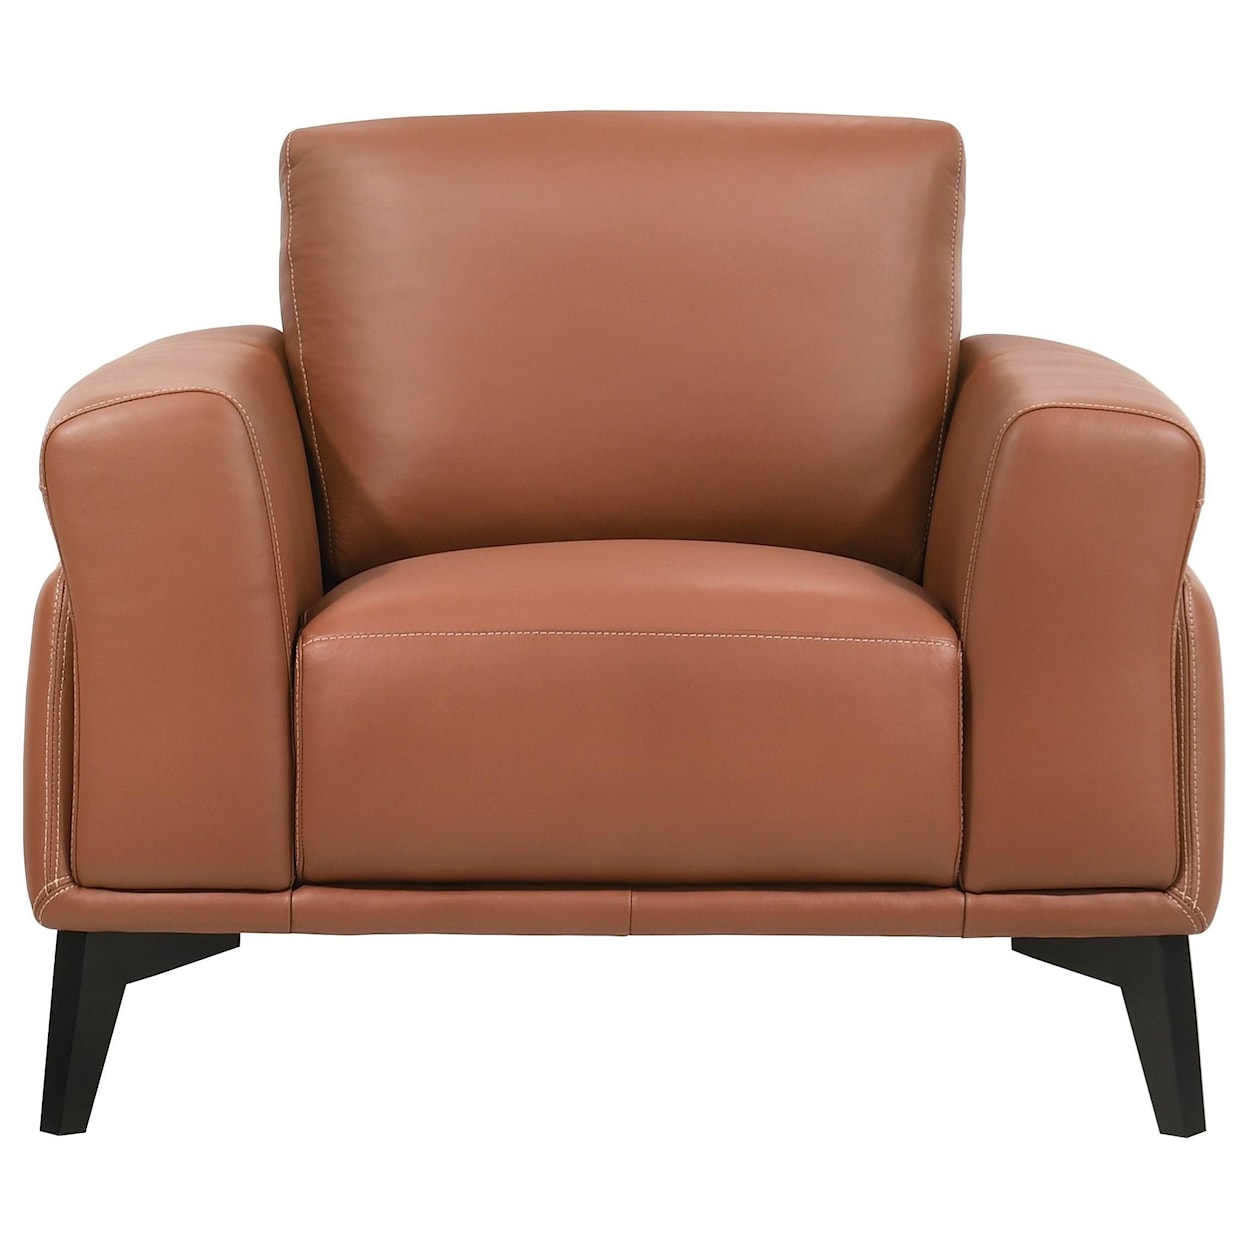 New Classic Furniture Como Upholstered Chair